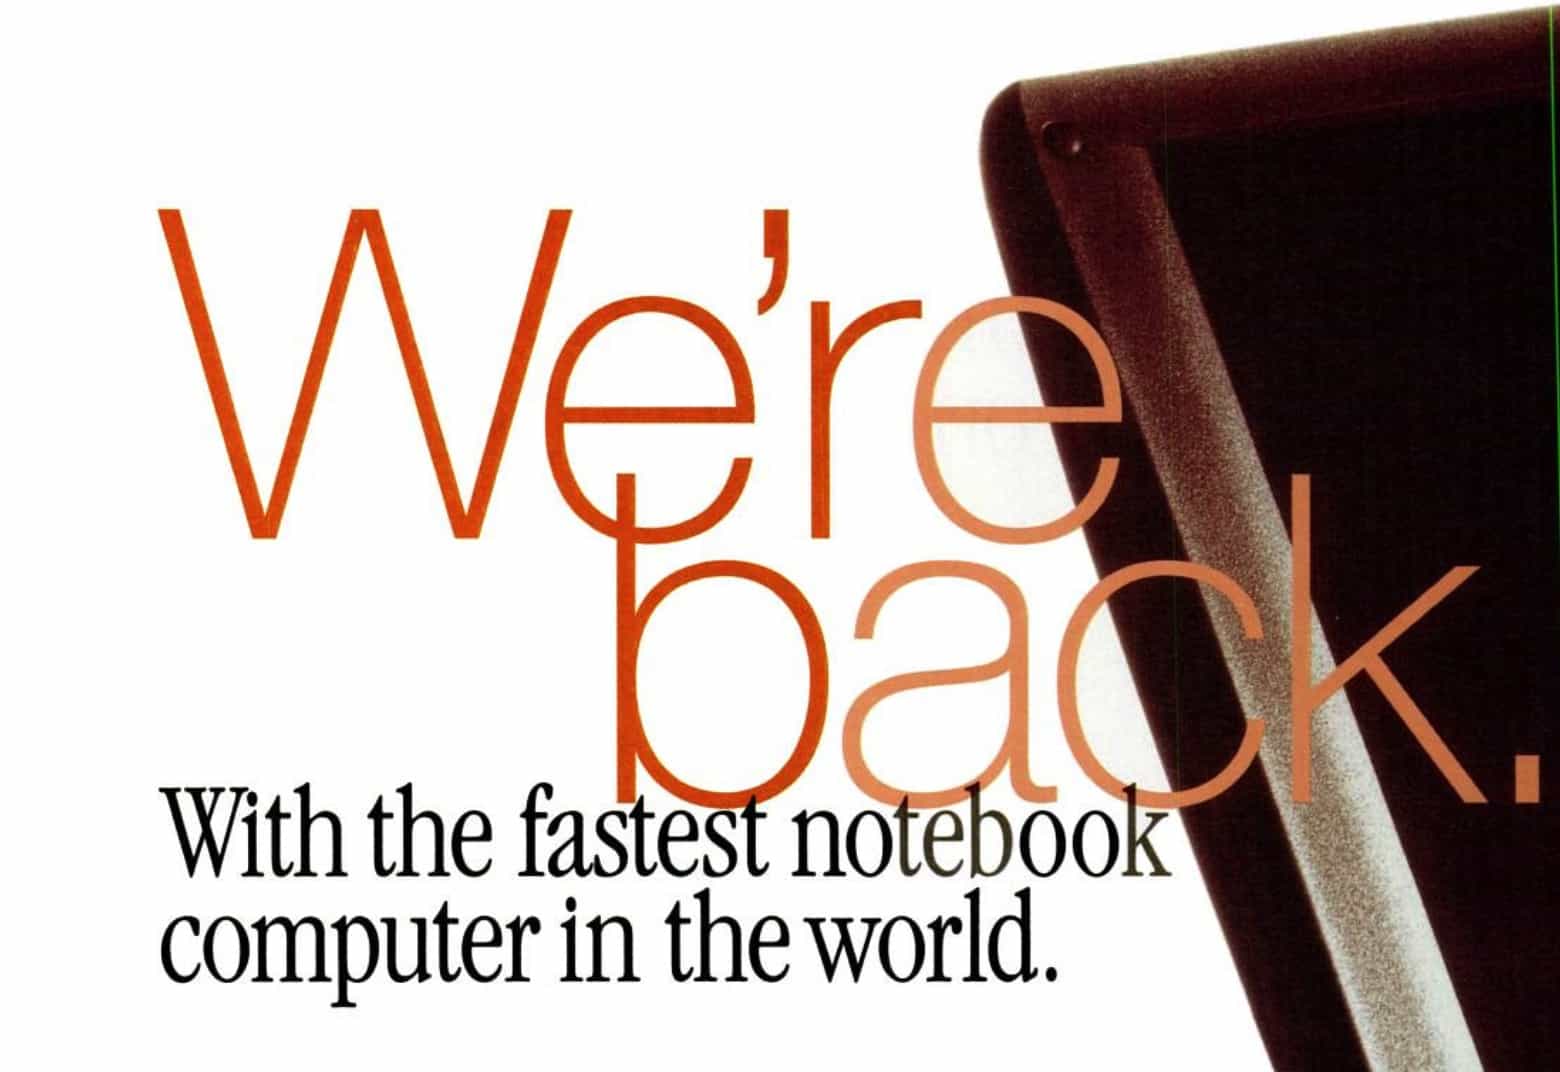 The PowerBook 3400 certainly lived up to its name.